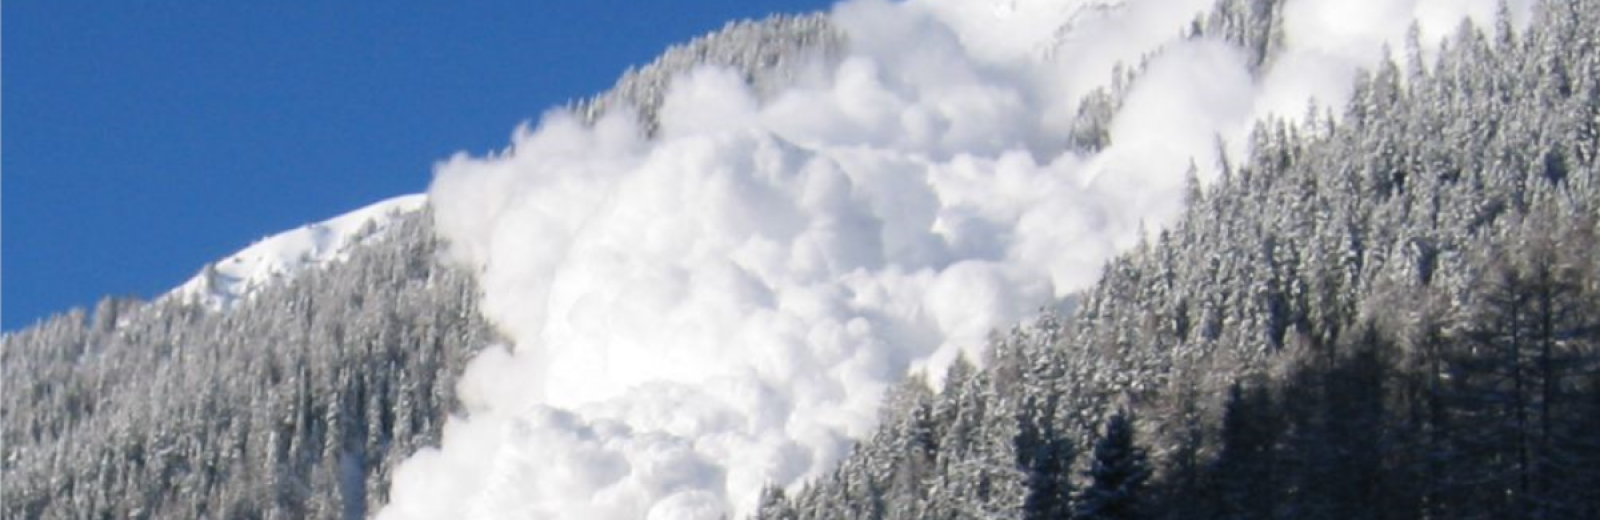 Avalanche risk management included in world heritage | House of ...